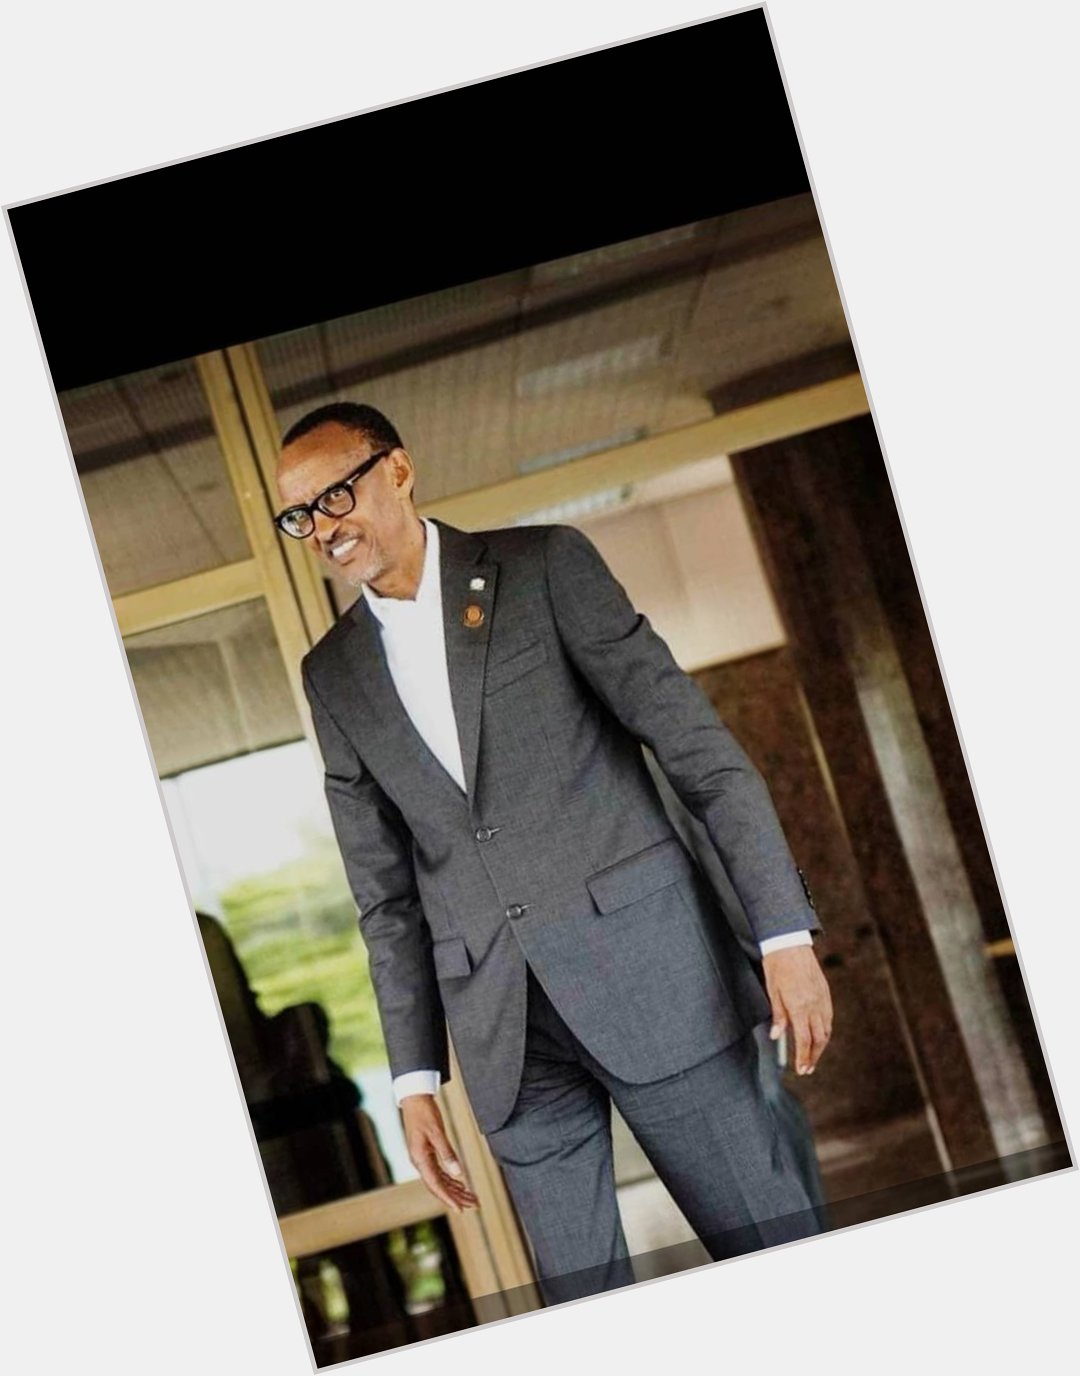 Happy birthday your Excellency Paul Kagame who means alot to Rwandans. 